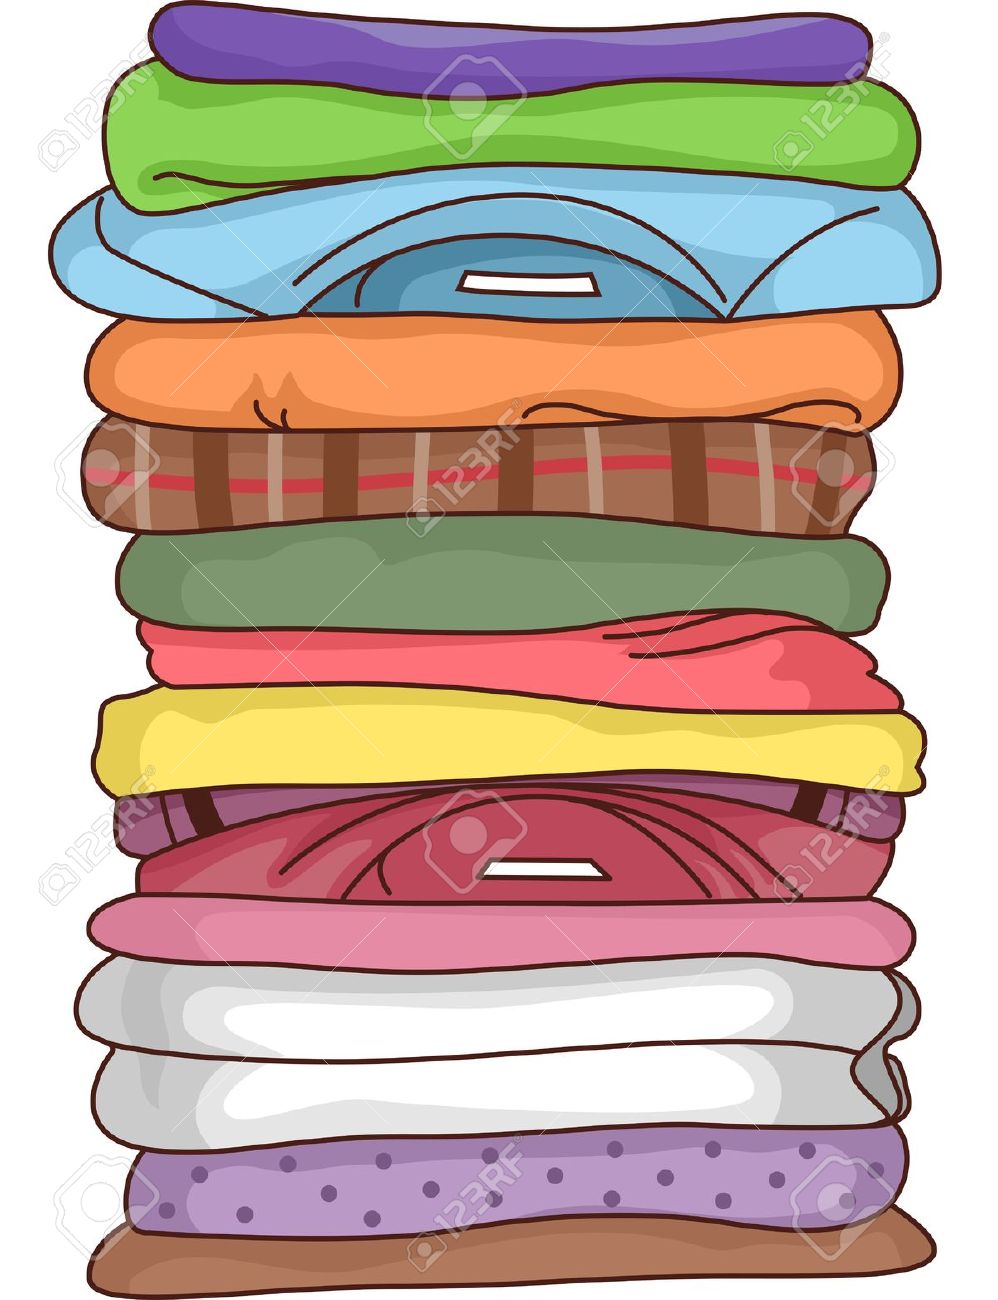 Download Free Stack Of Clothing Free Download Clipart PNG Free FreePngClipa...